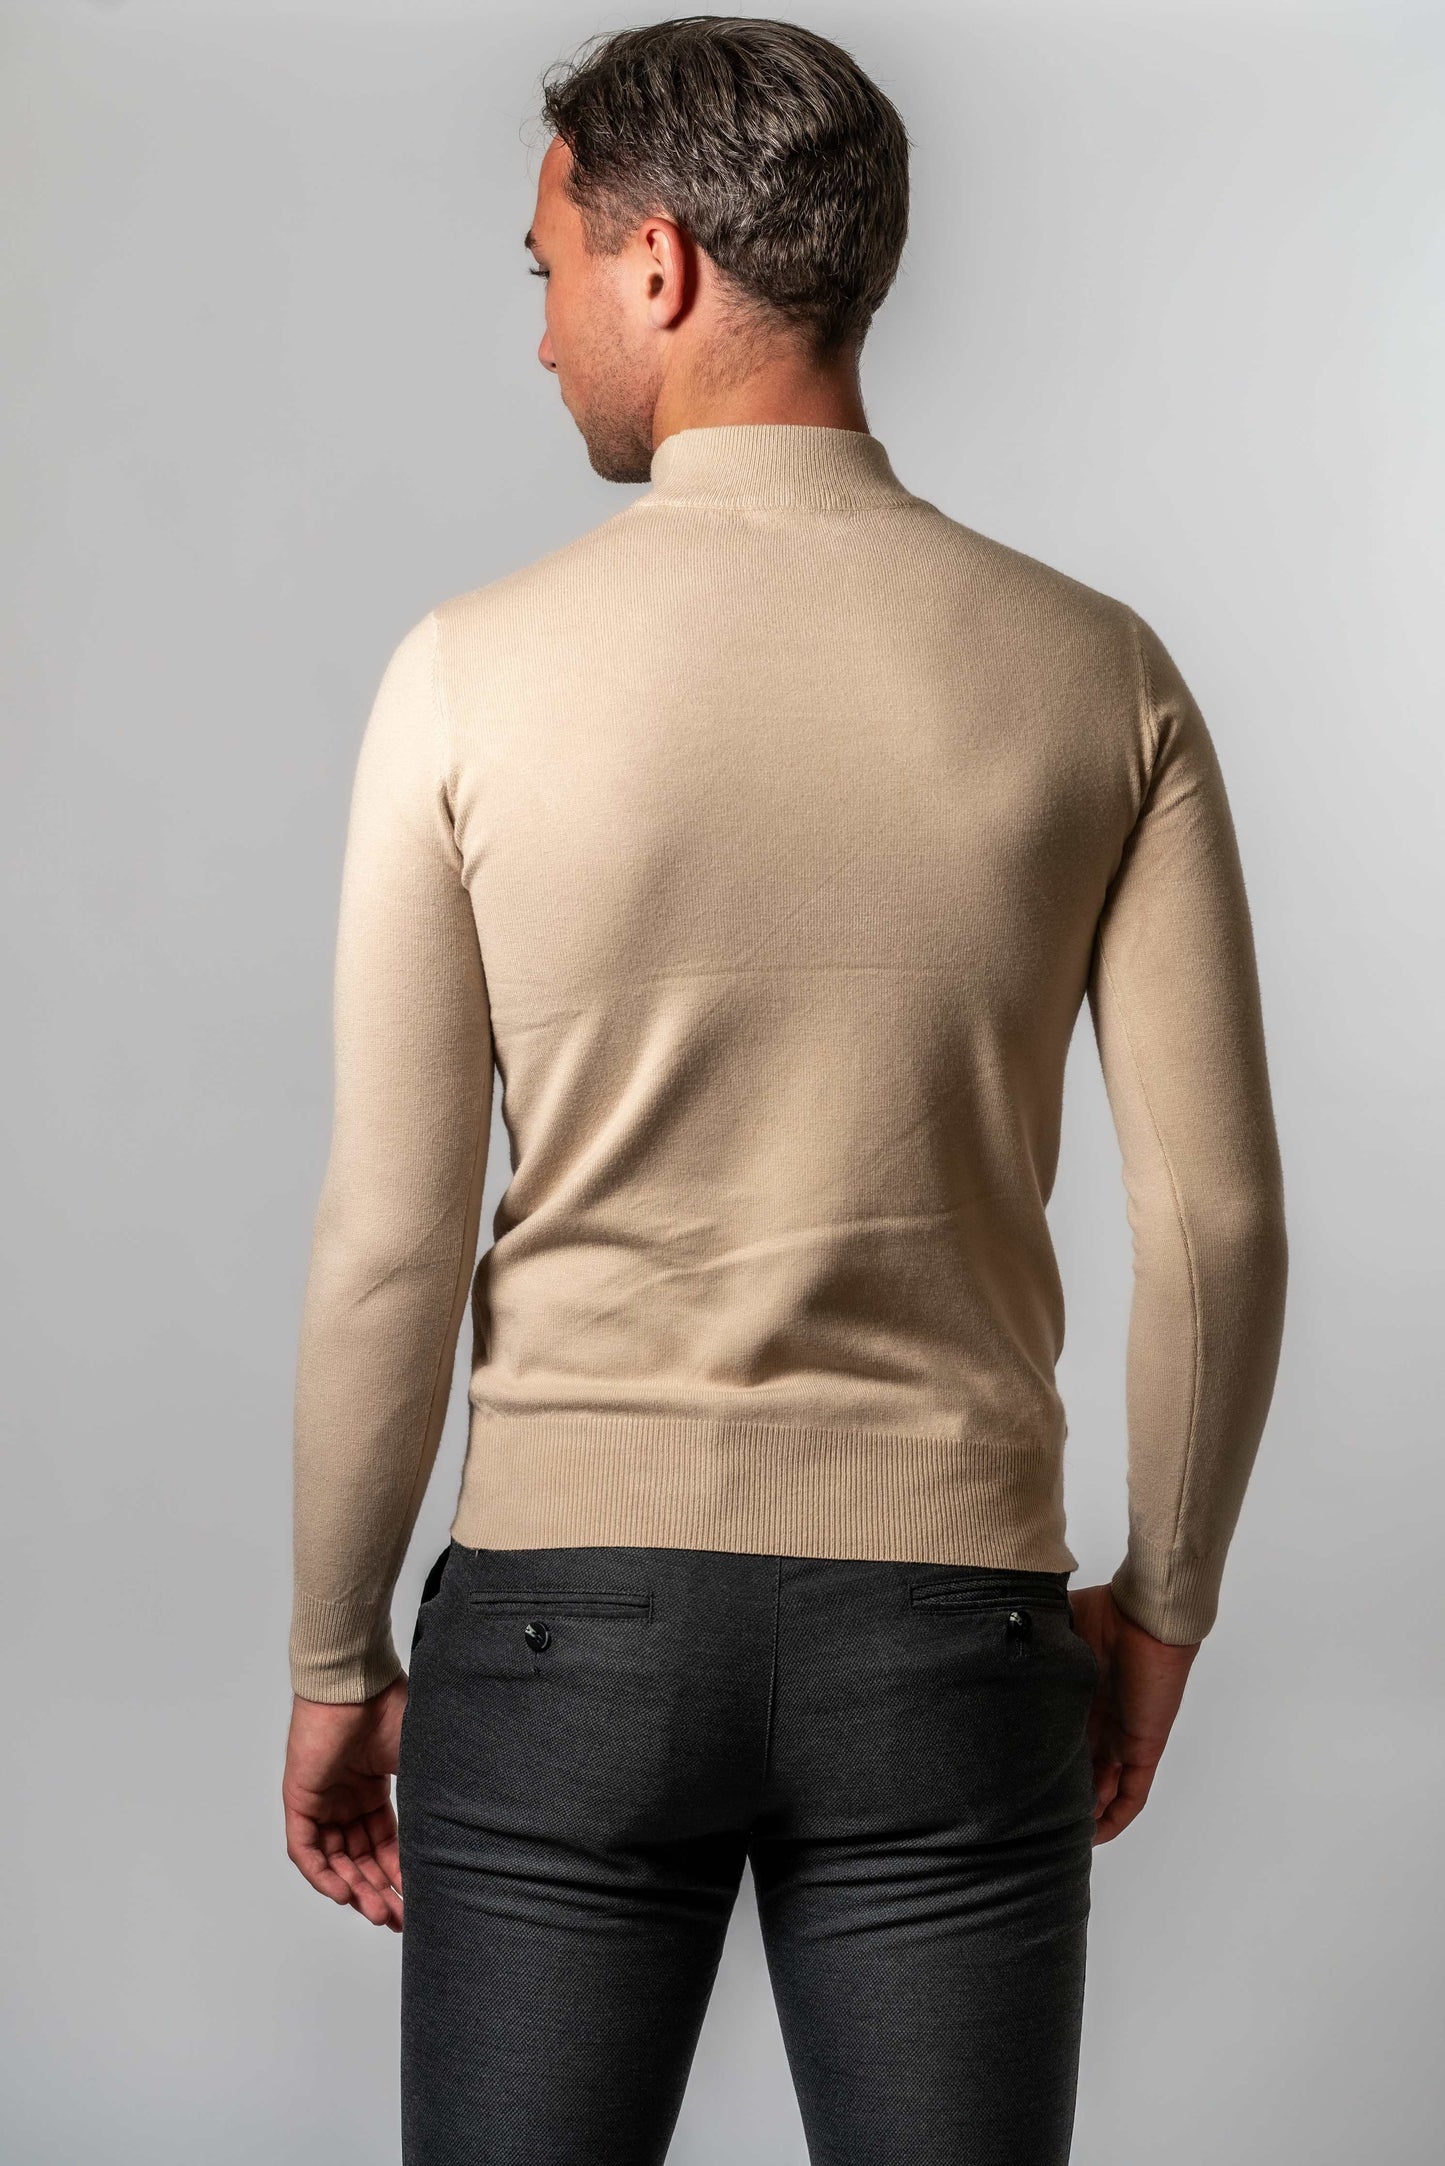 Stand-up collar sweater in beige